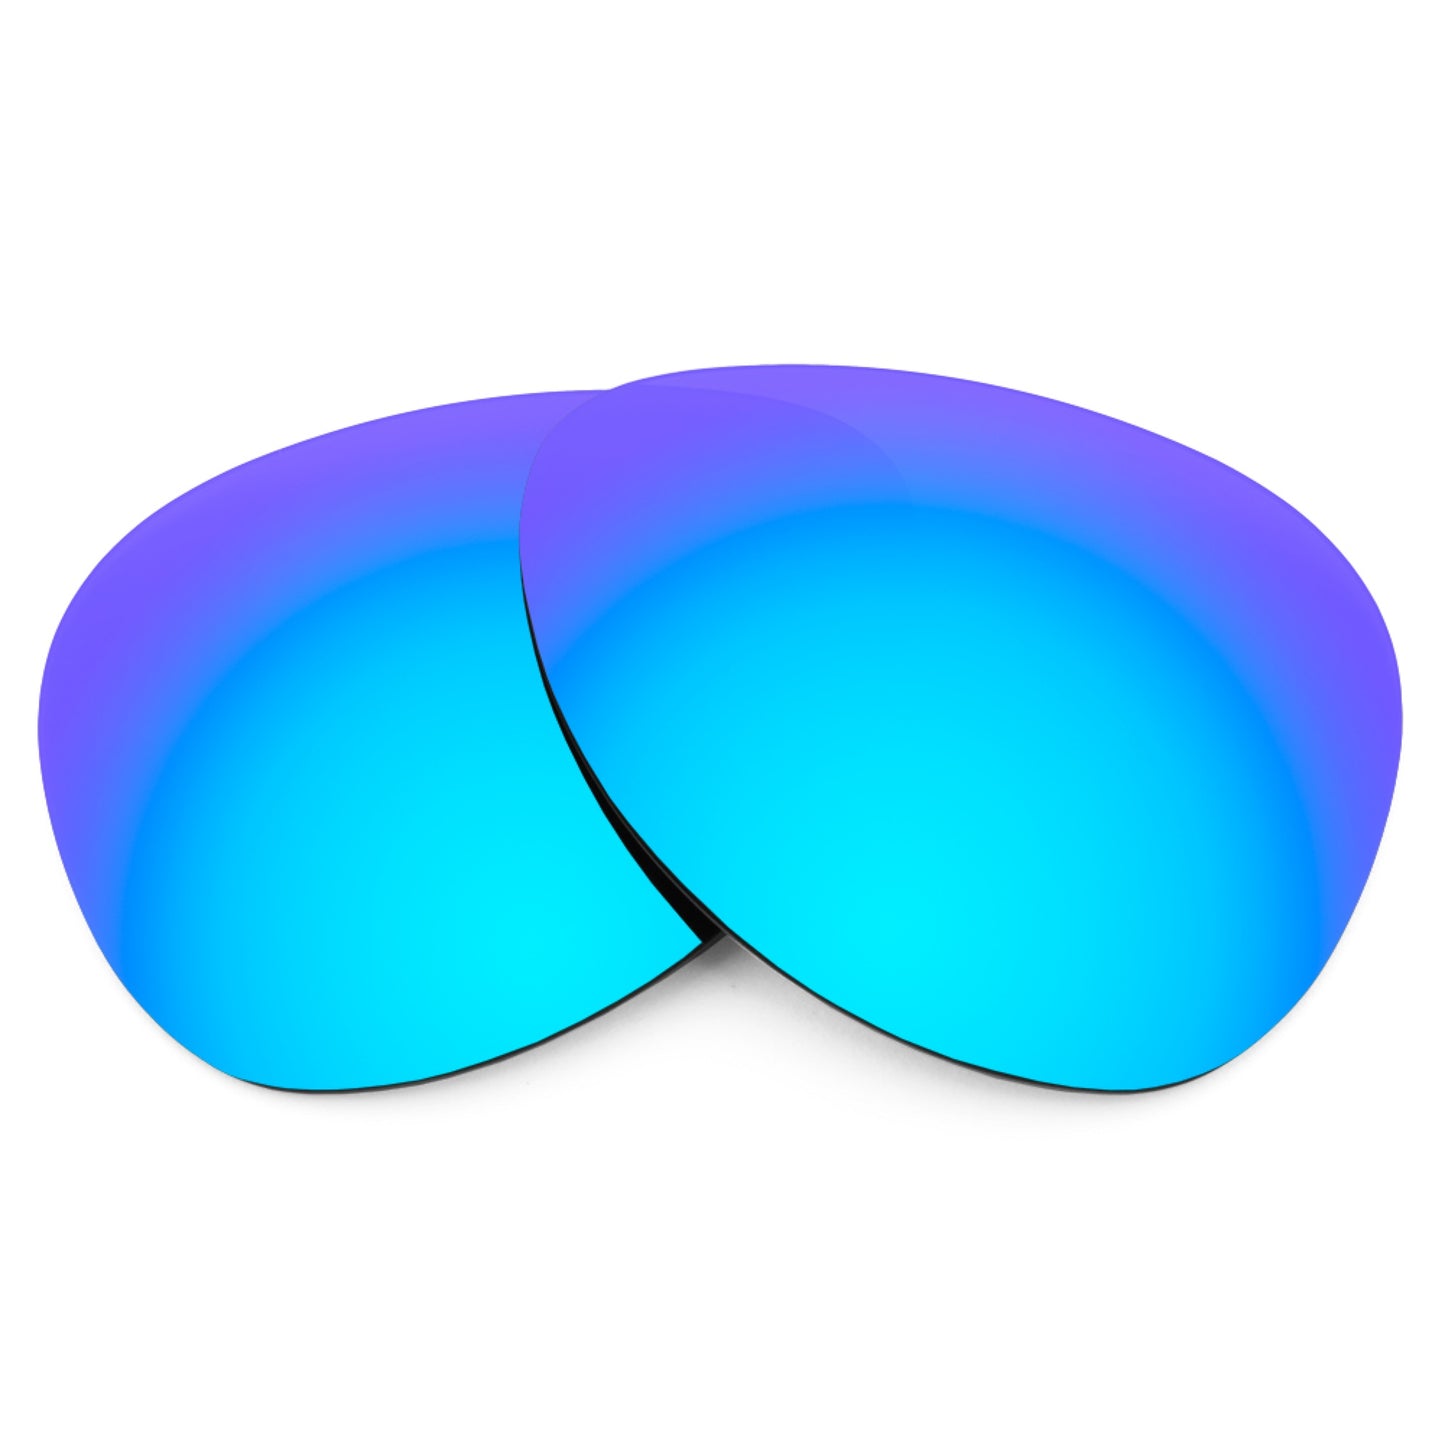 Revant replacement lenses for Ray-Ban Aviator RB3025 58mm Non-Polarized Ice Blue